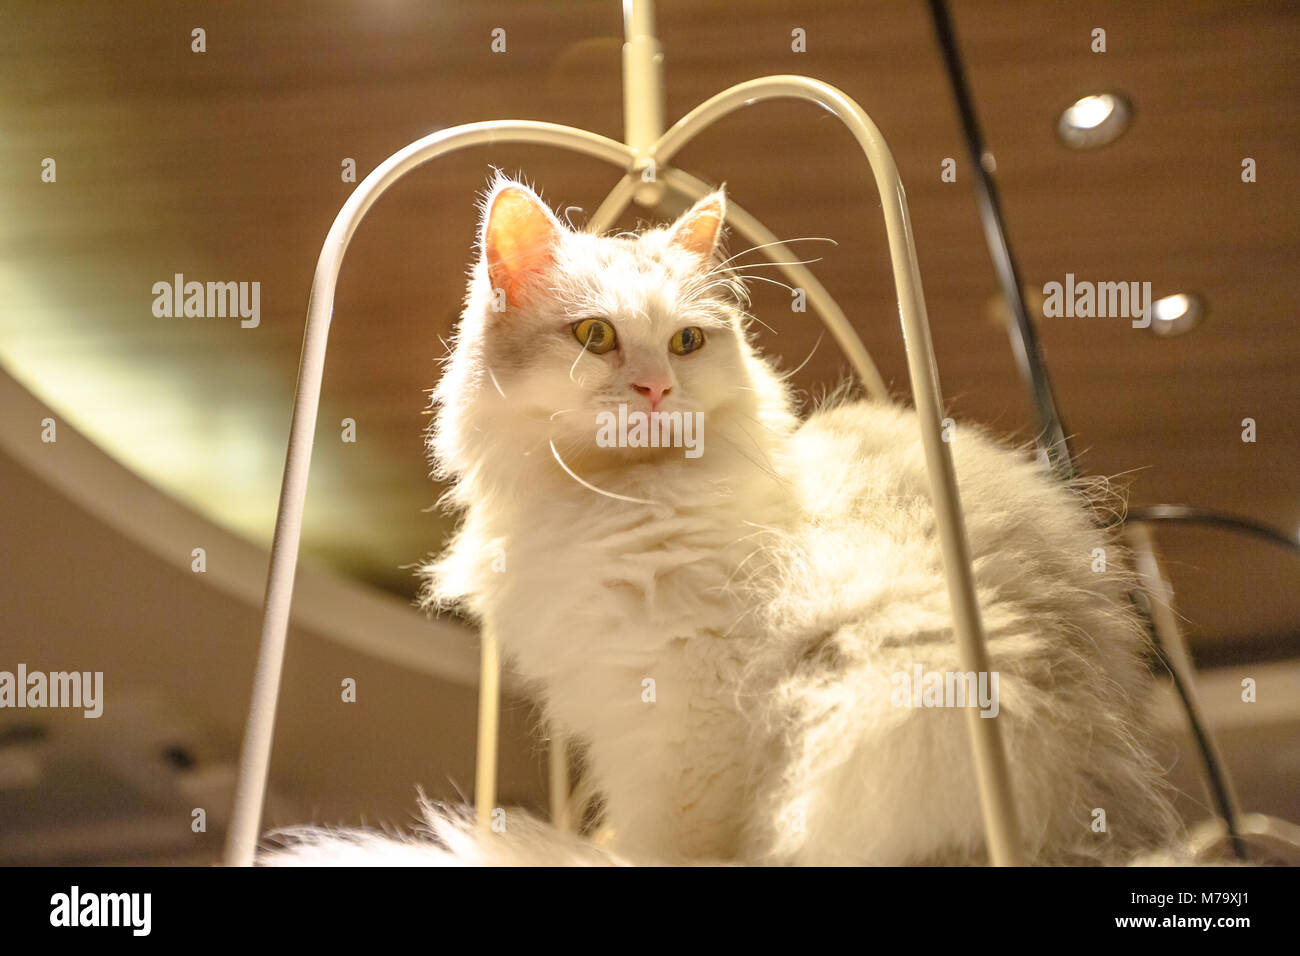 Purebred white Turkish Angora cat with long fur sitting in his basket. Stock Photo